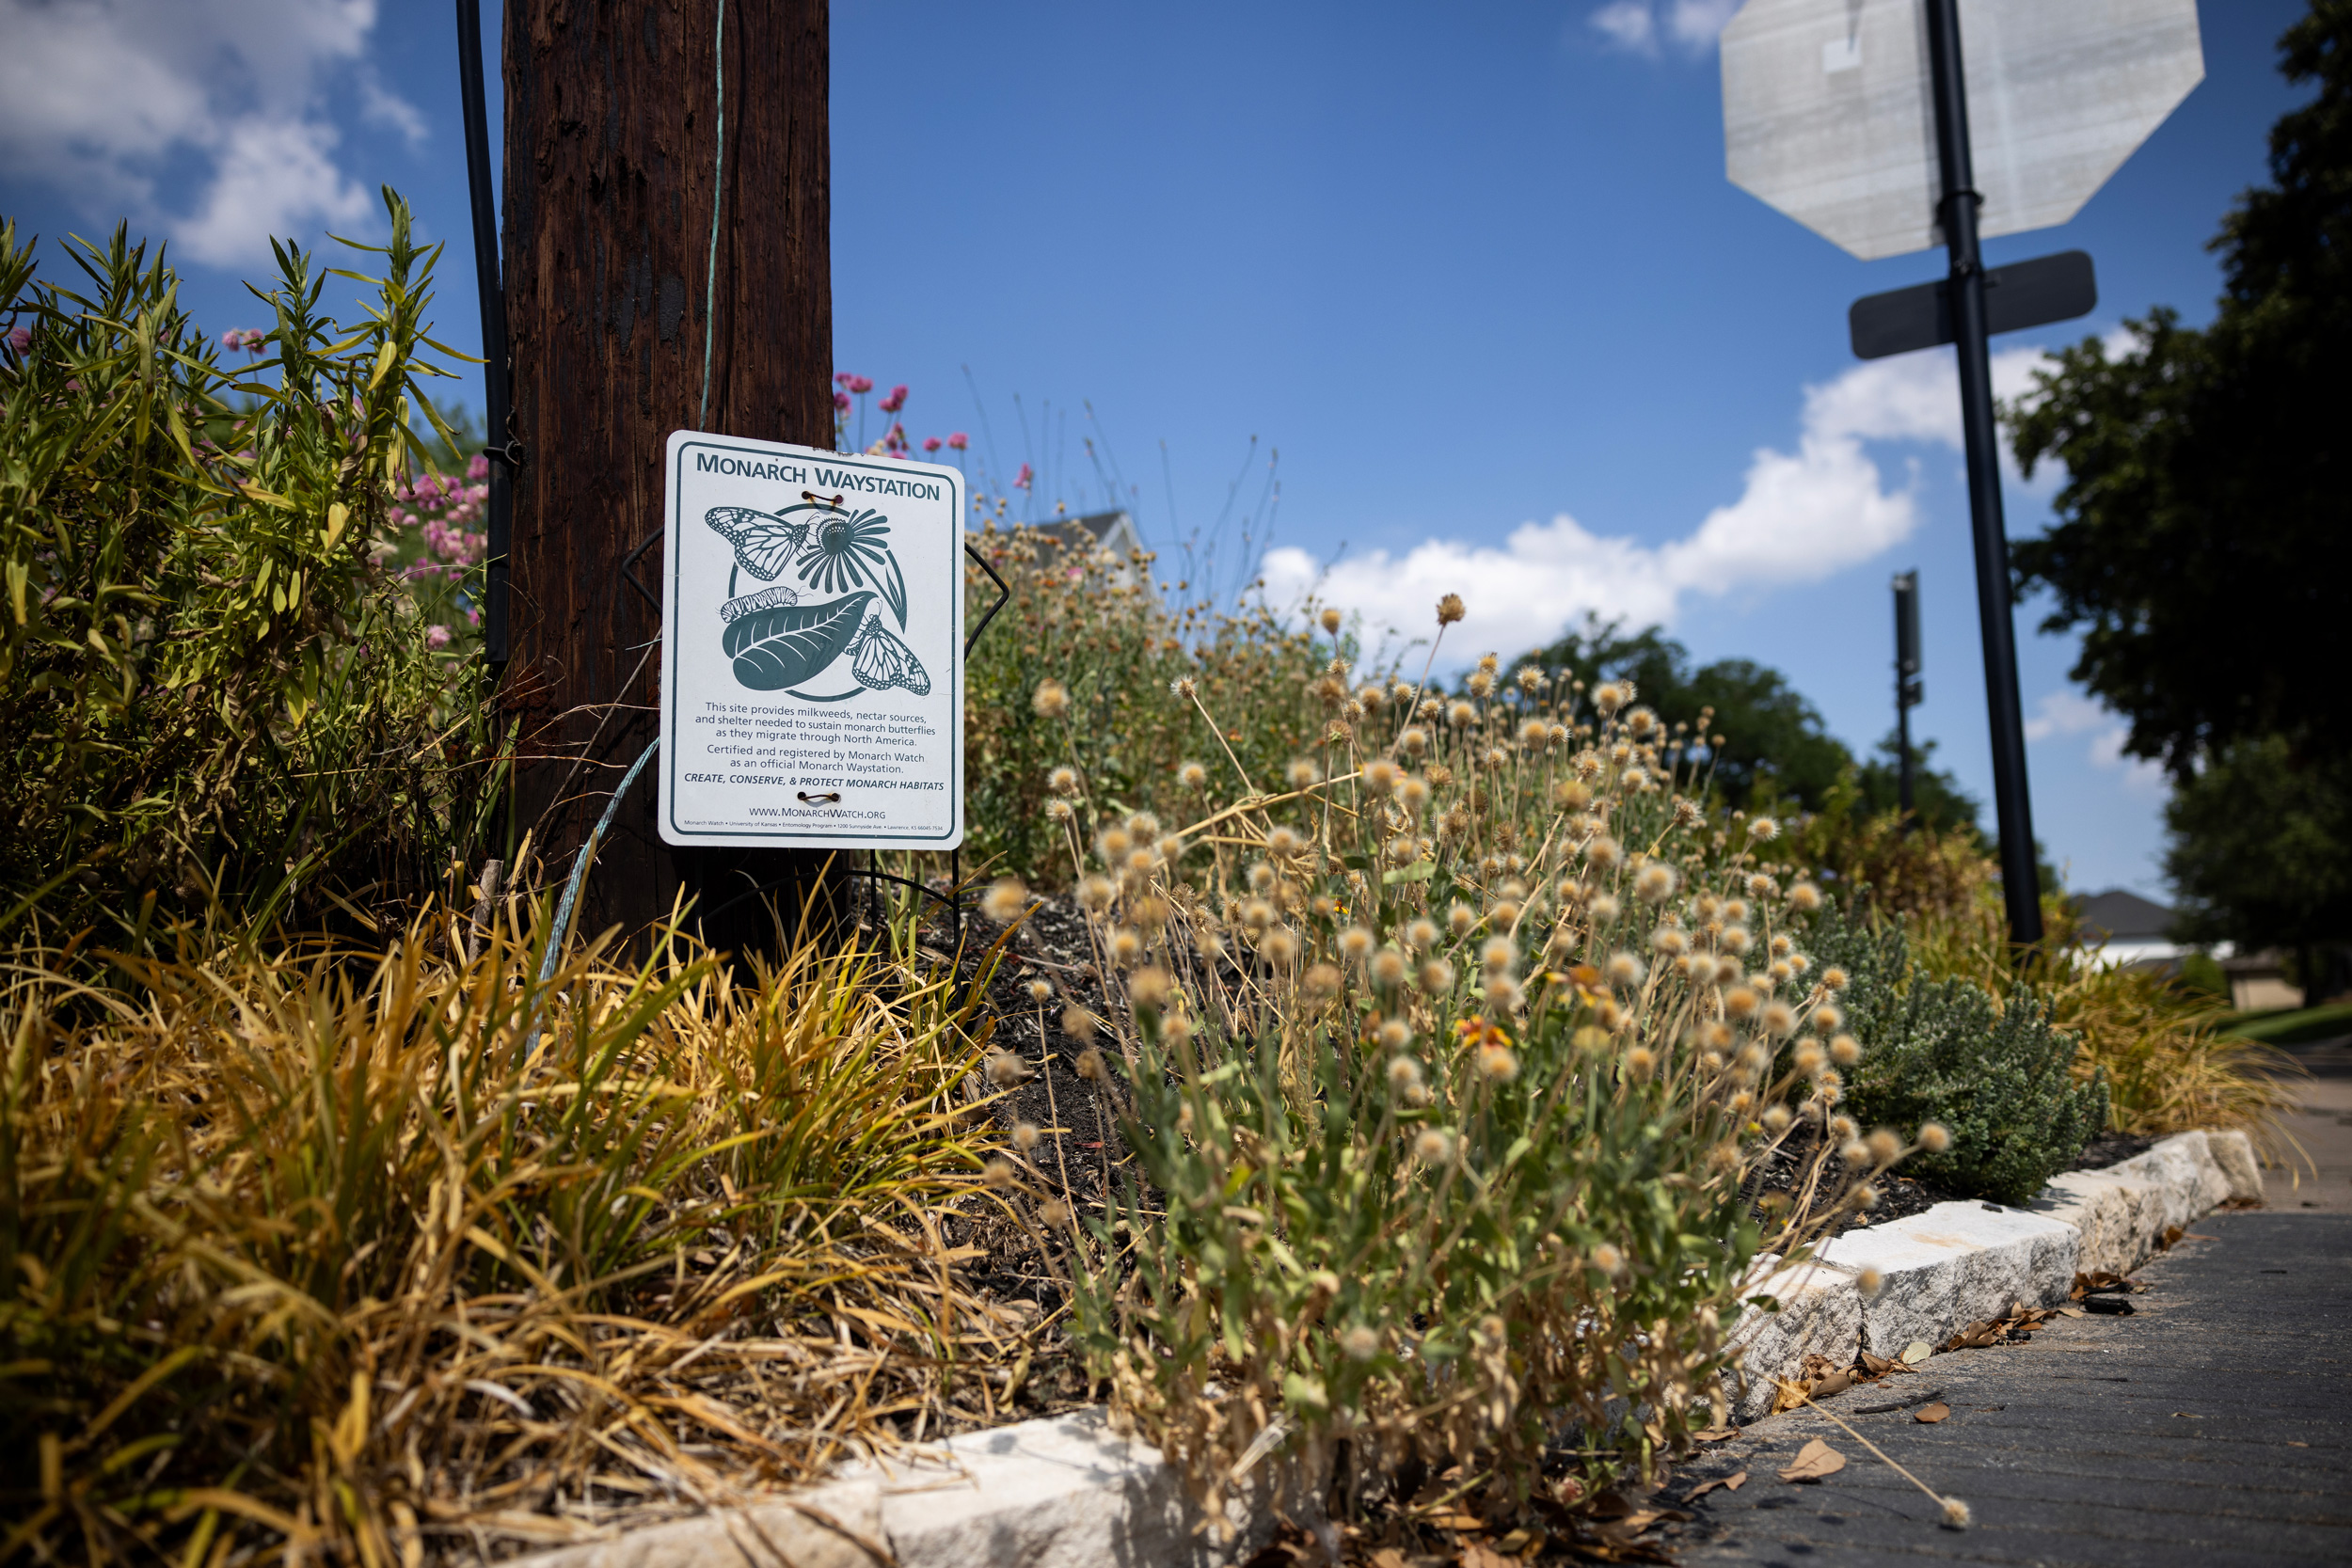 A Monarch Waystation plaque on Claudia Schnelle’s xeriscaped front lawn